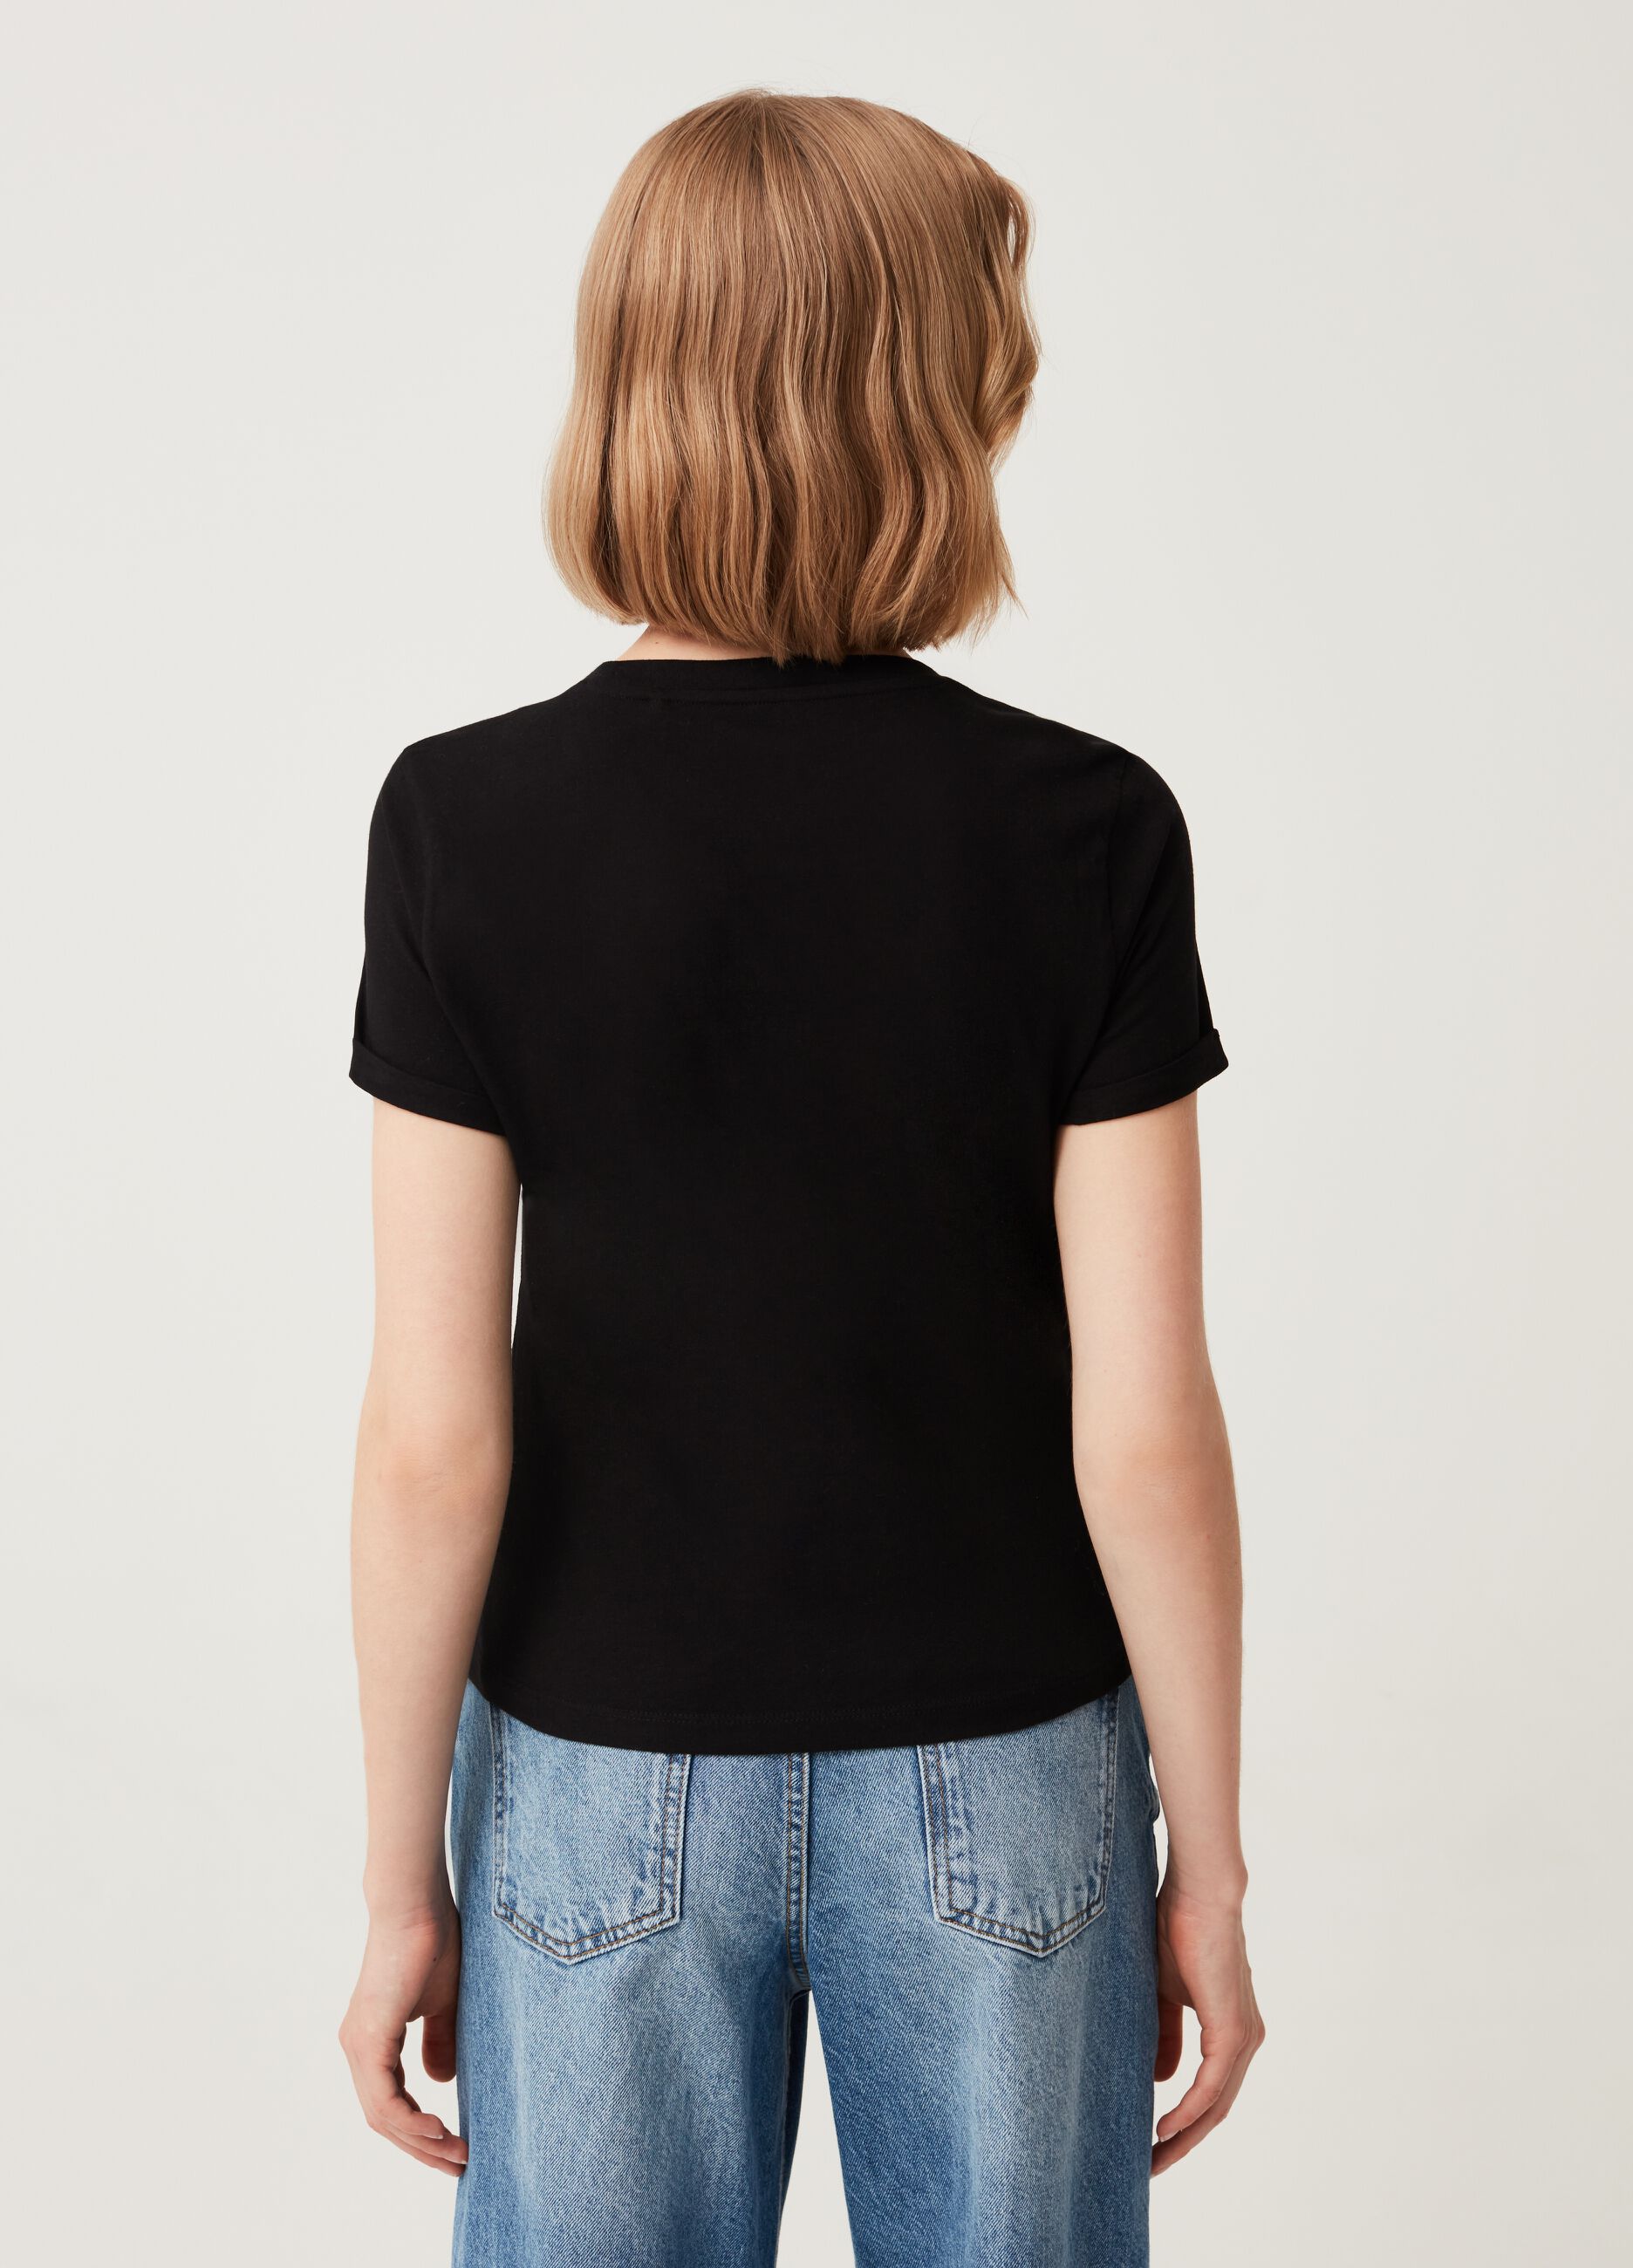 T-shirt with small pocket and frills